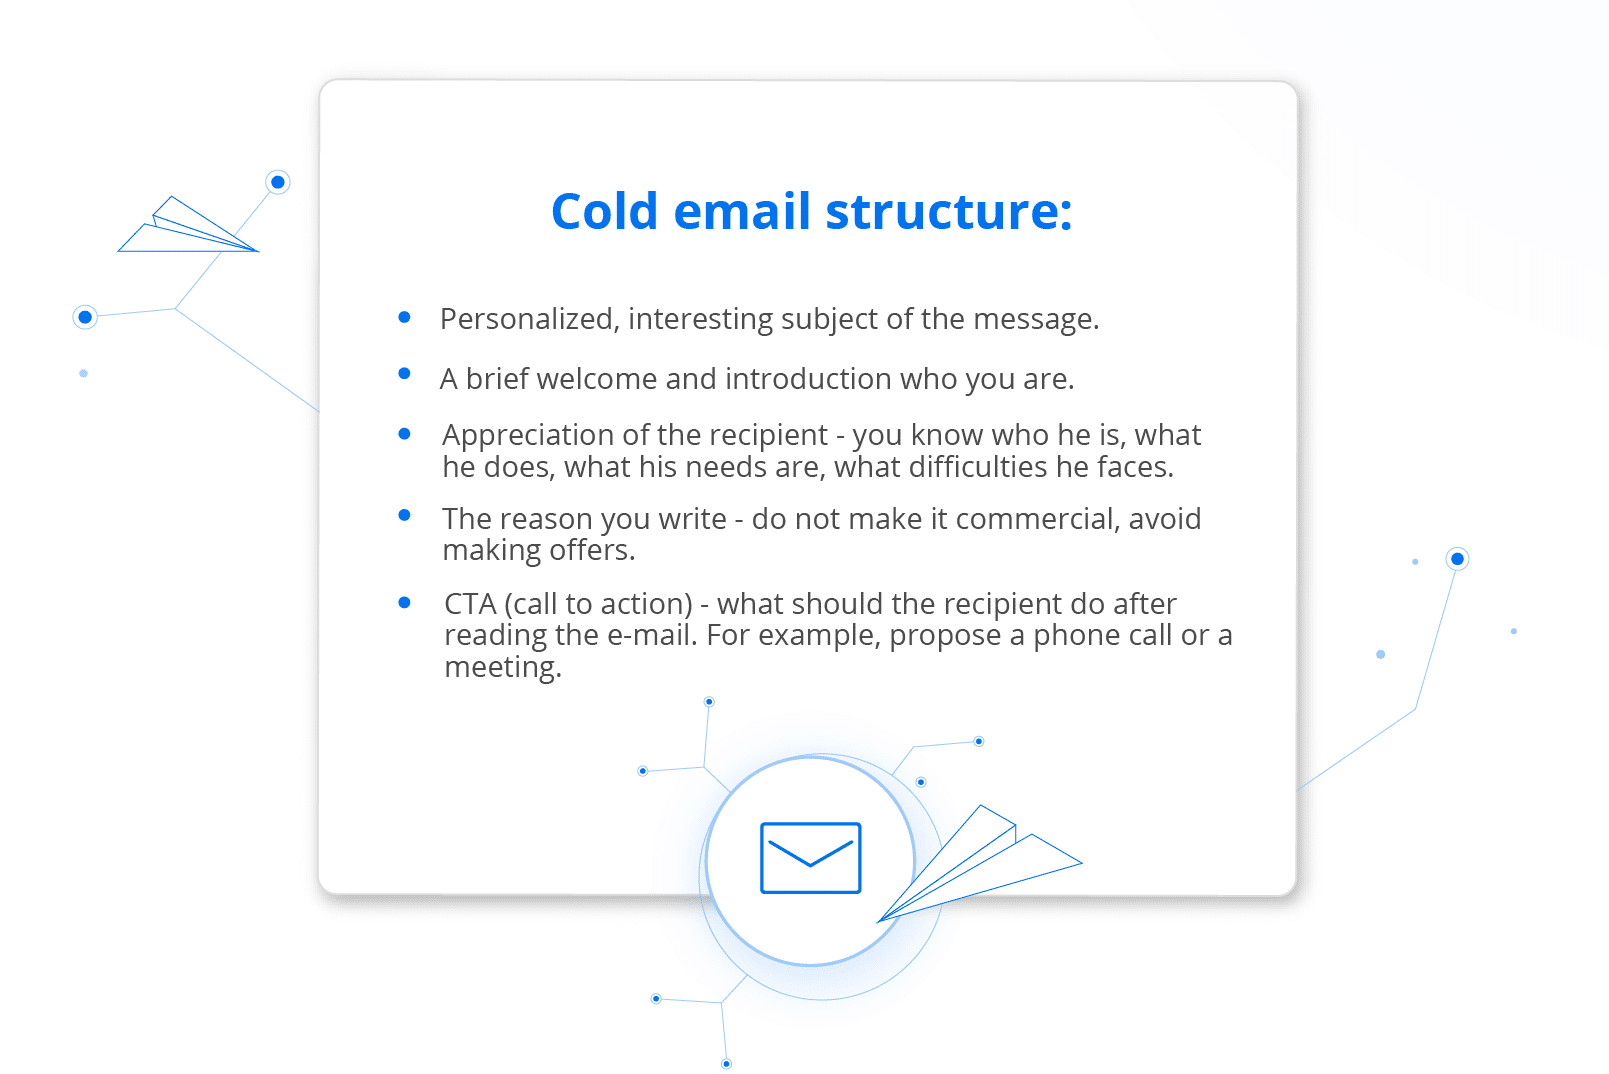 How to create an effective cold email?